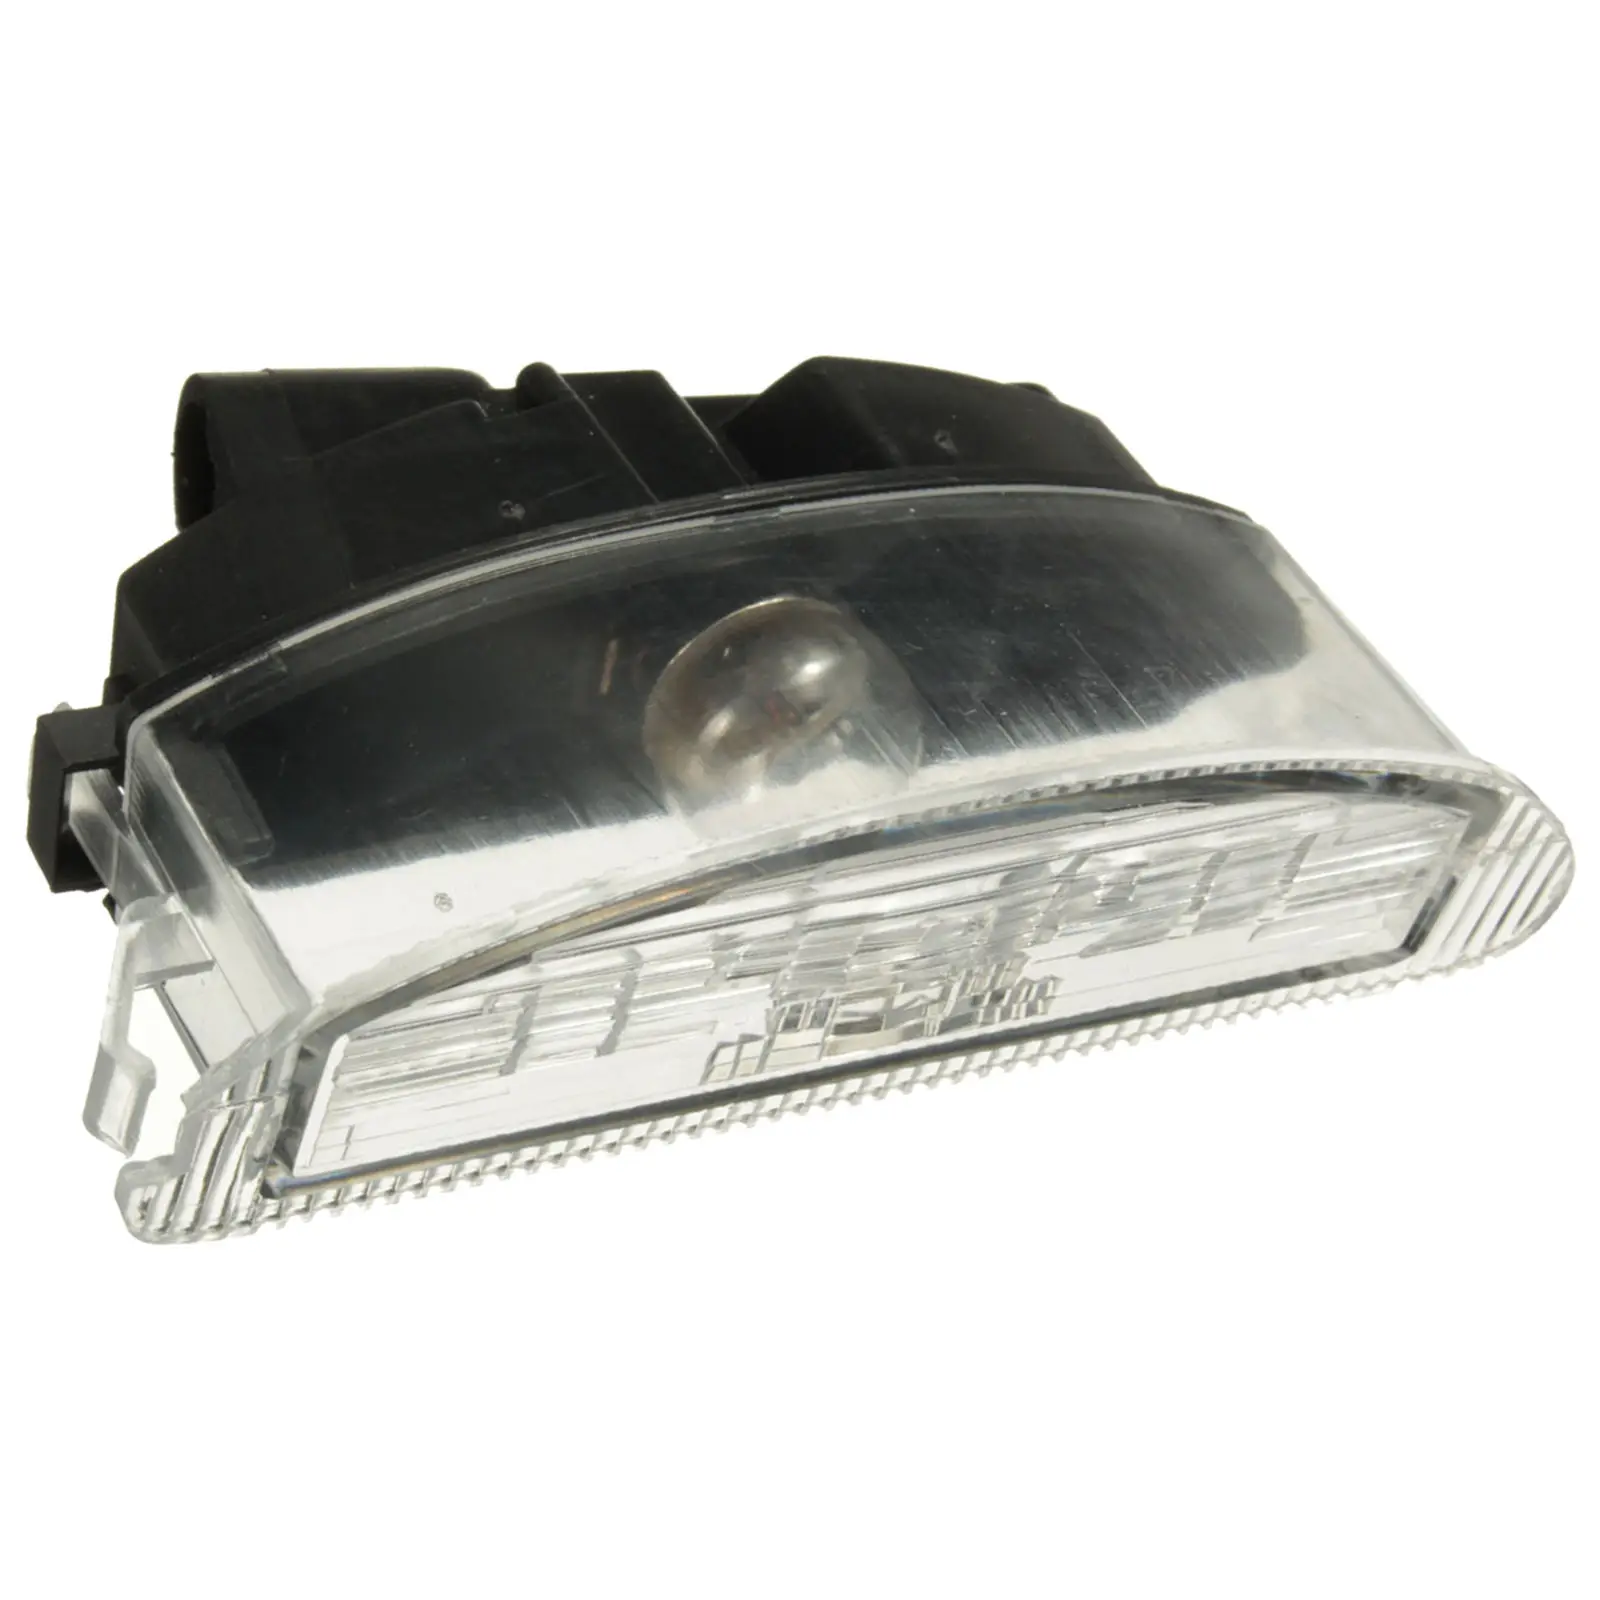 Number Plate Lamp Light 7700410754 for Clio II 98-05 Replacement Parts Acc